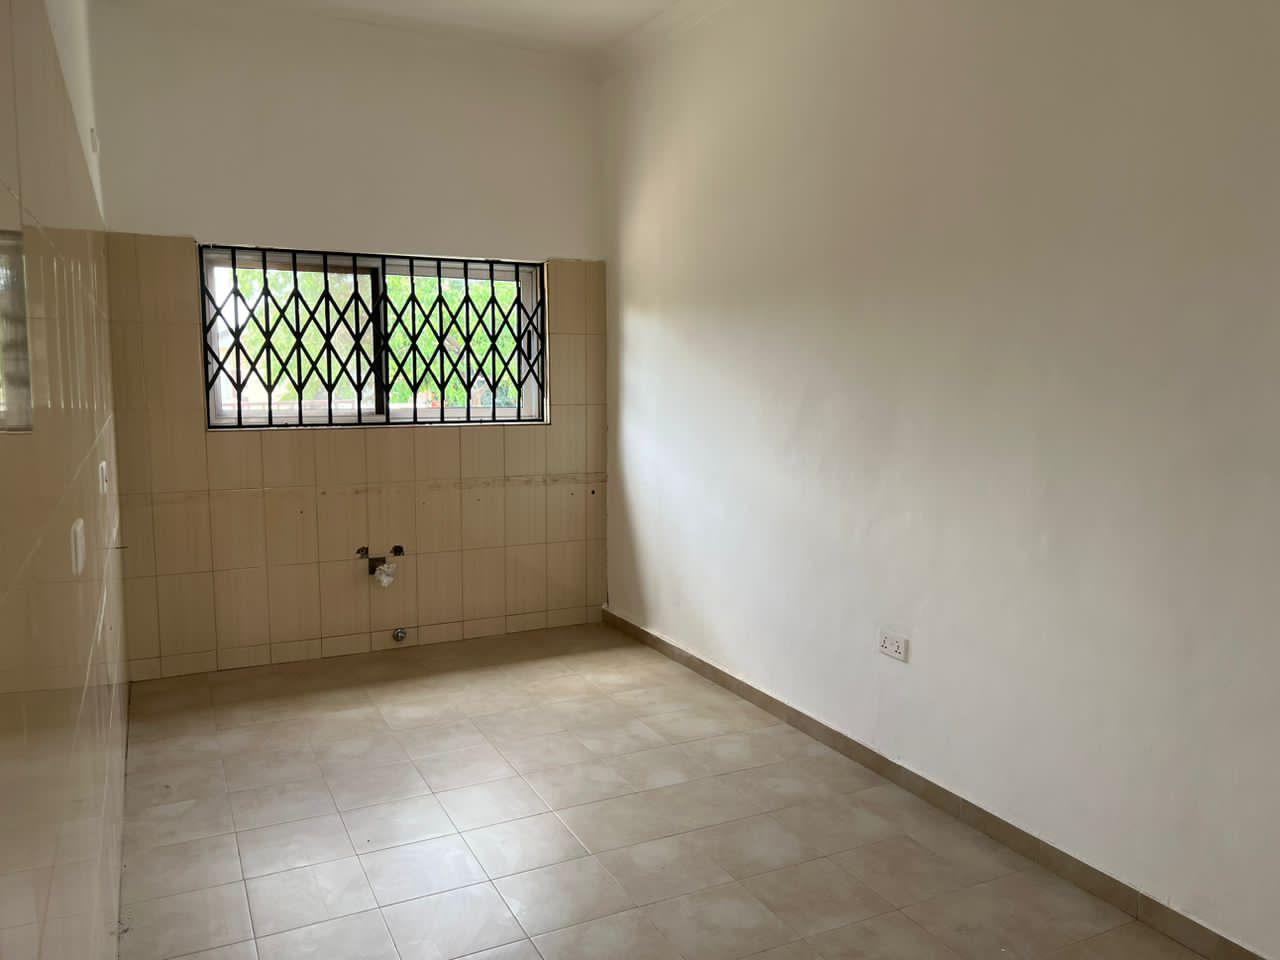 Two 2-bedroom House in a Gated Community for Sale at Oyarifa